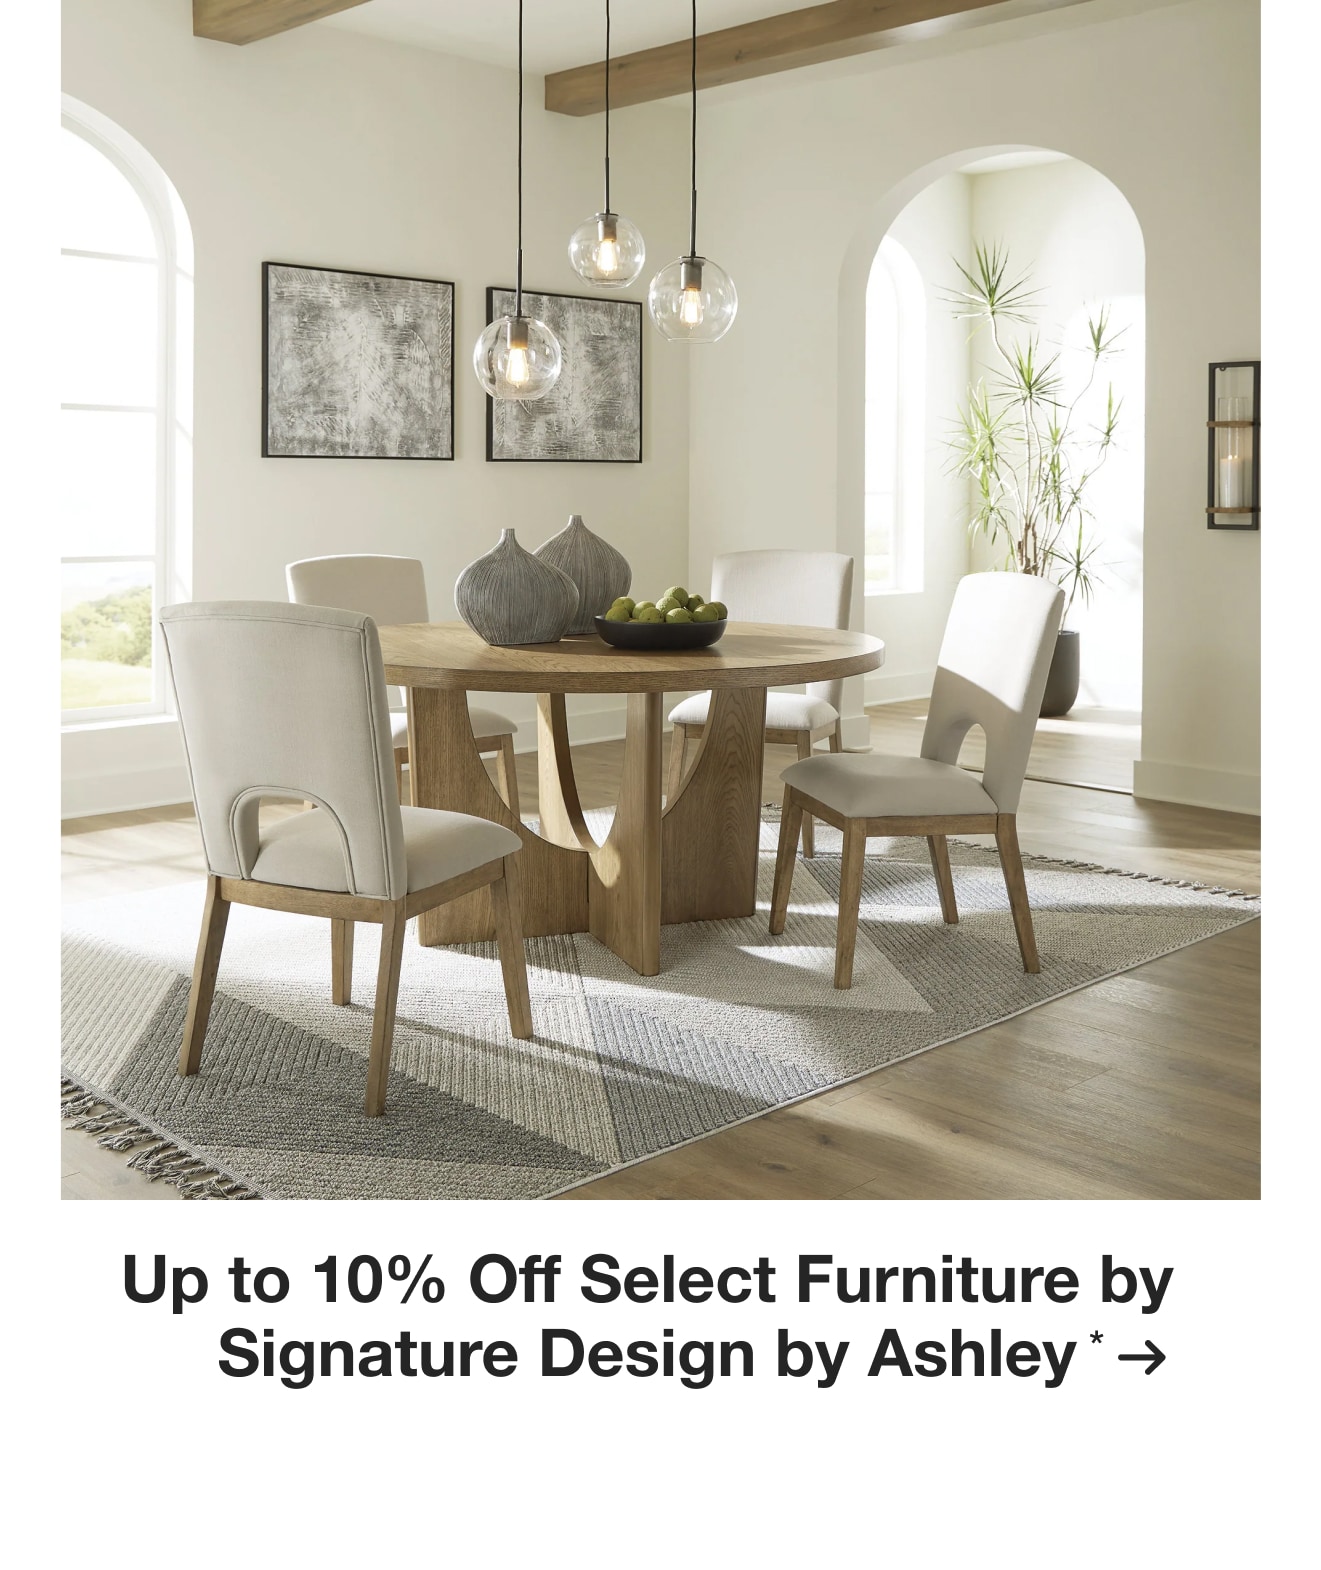 Up to 10% Off Select Furniture by Signature Design by Ashley*